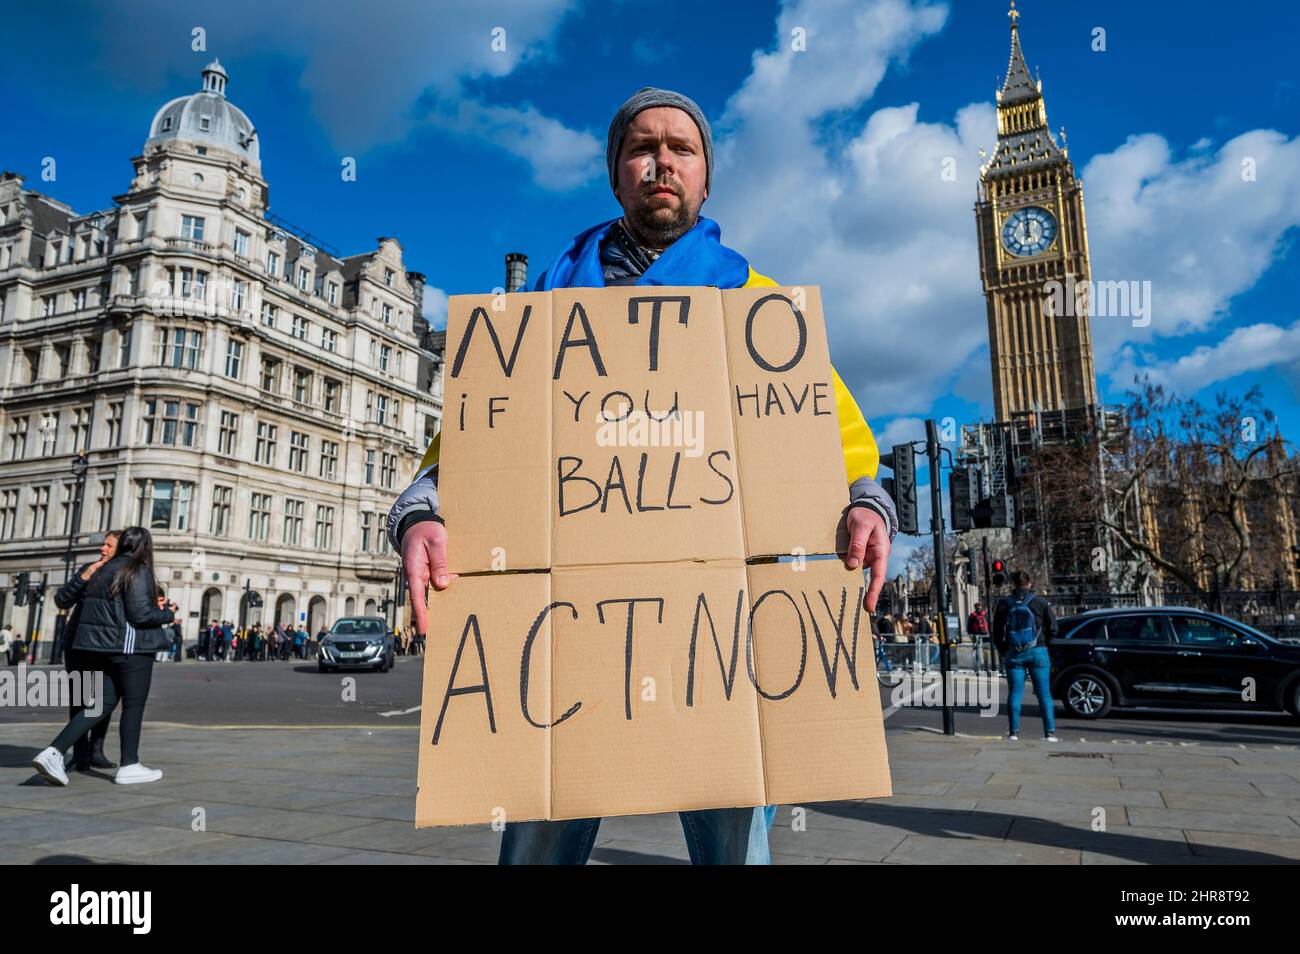 London, UK. 25th Feb, 2022. NATO act now - Ukranians and Russians gather Westminster to demand that Putin Stops The War and invasion of Ukraine. Credit: Guy Bell/Alamy Live News Stock Photo